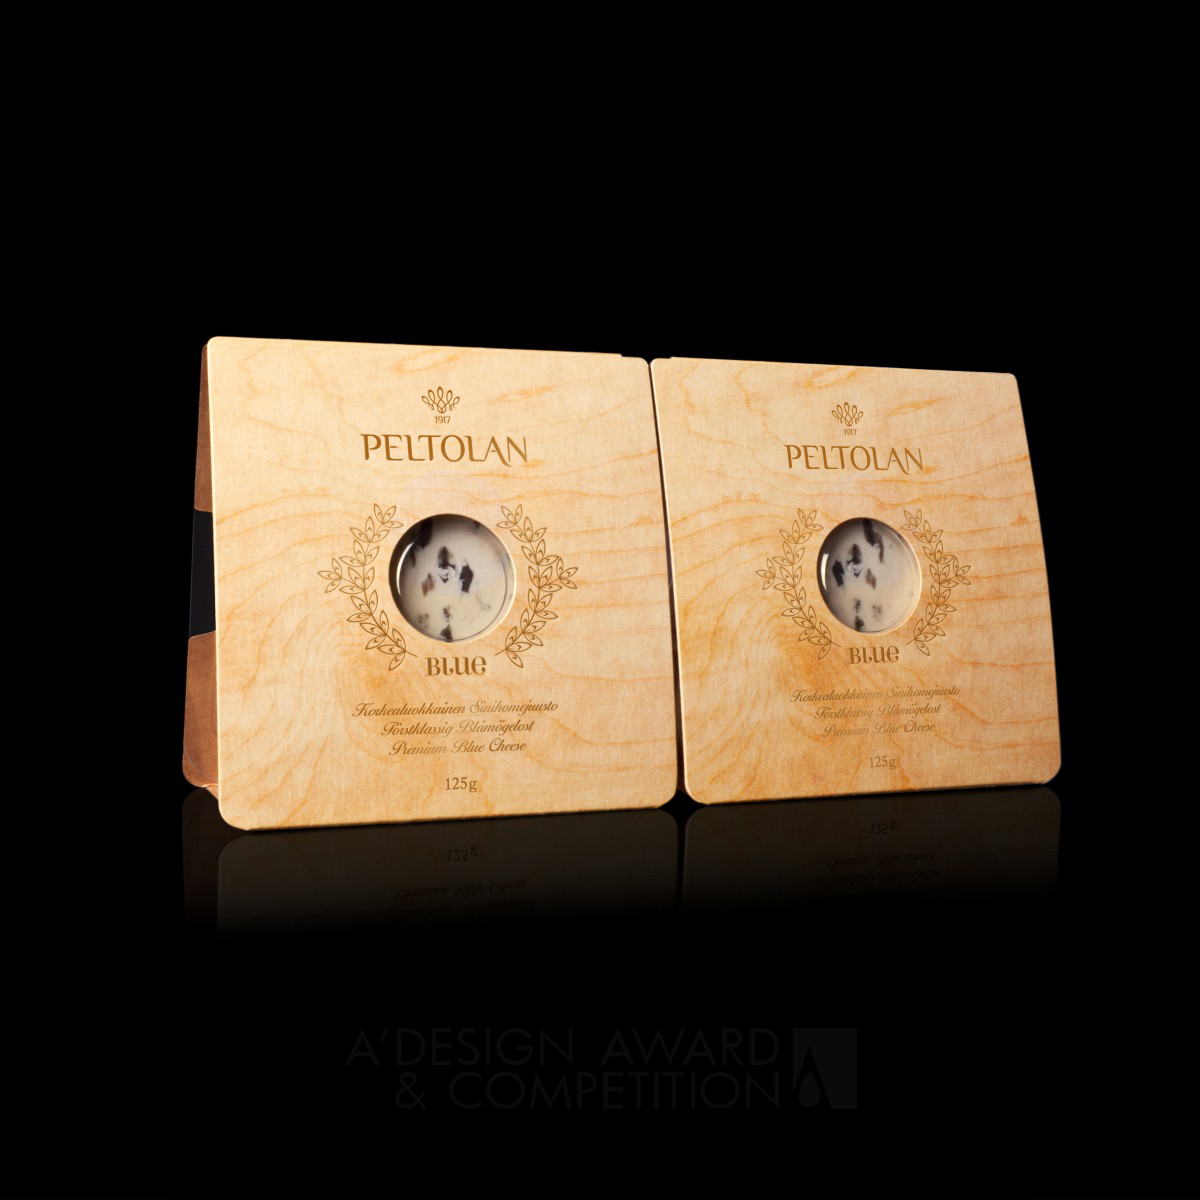 Peltolan Blue Cheese  Innovative brand and packaging design by Packlab